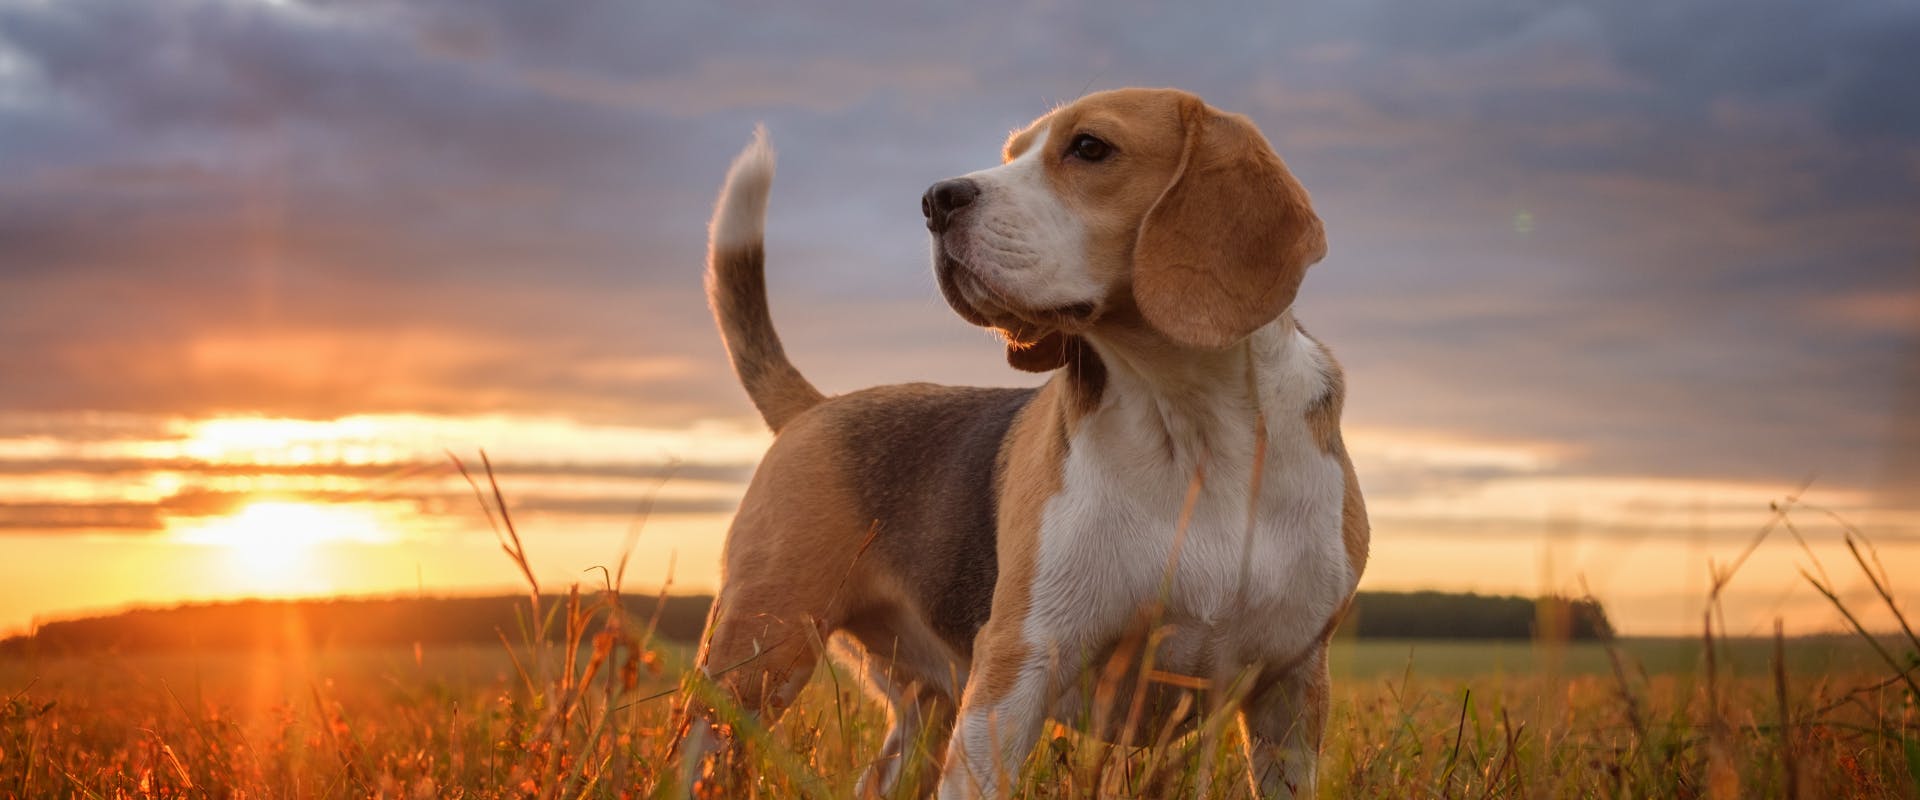 A Beagle stands in a field with the sun going down.